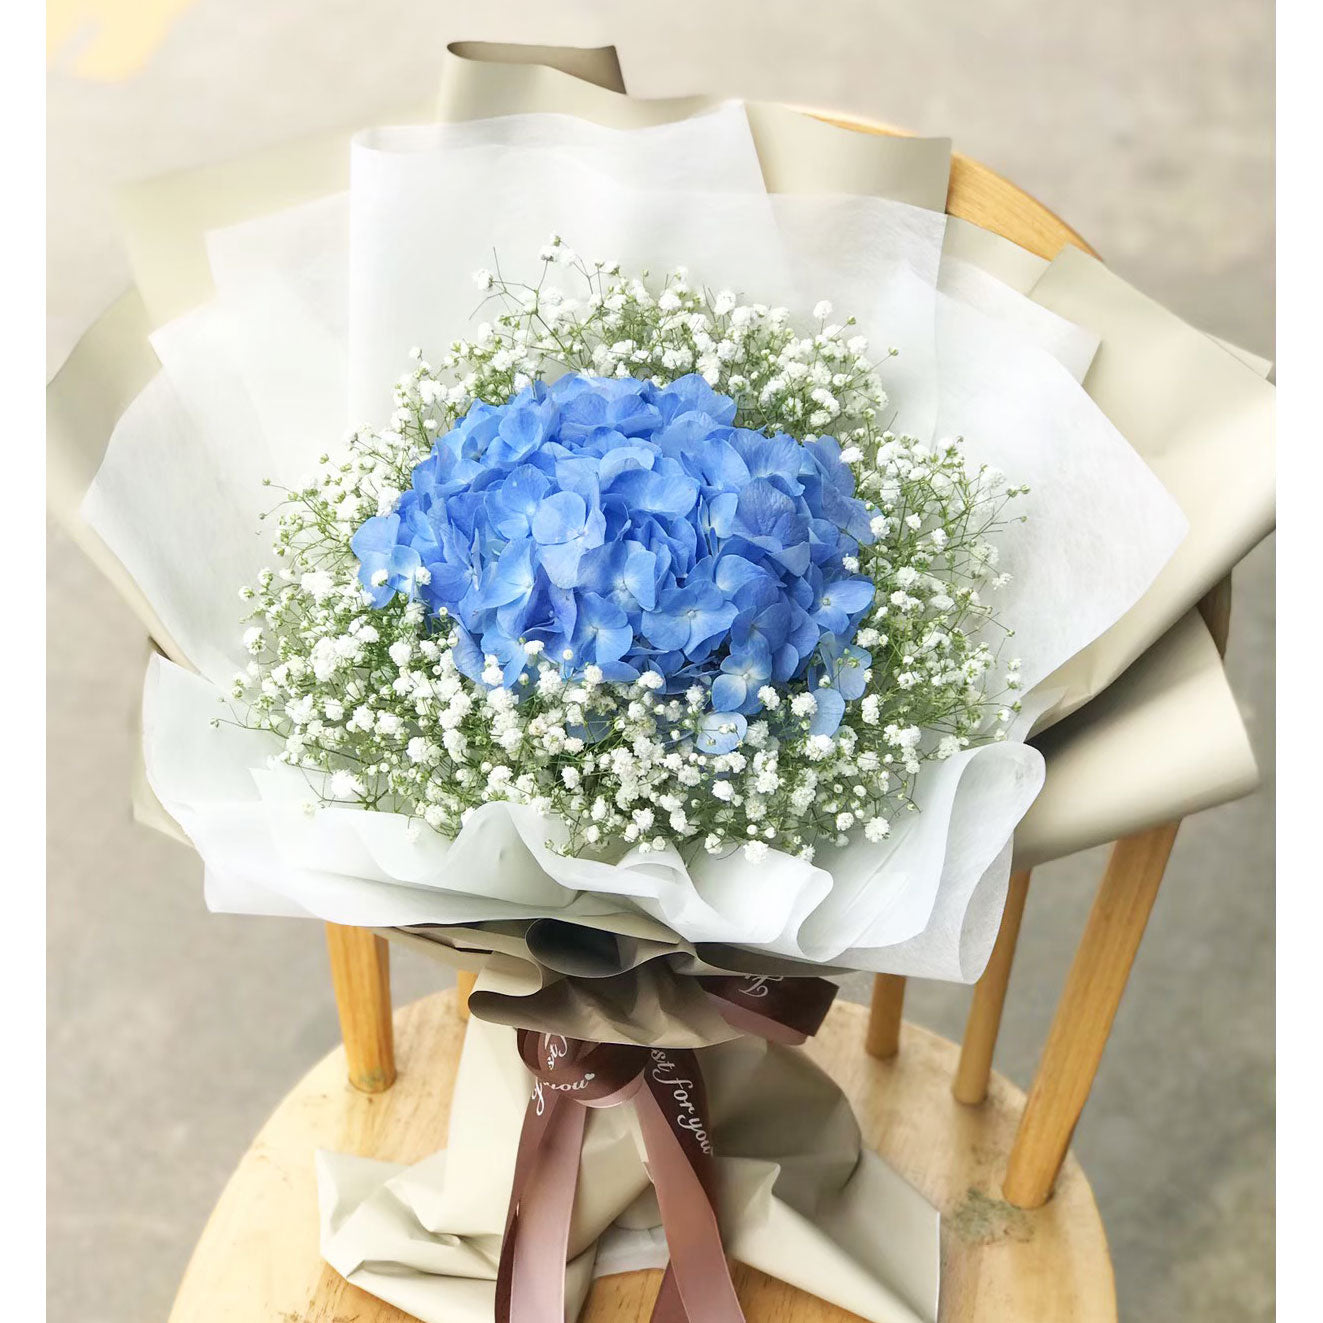 "Blue Love" bouquet of blue hydrangea and white gypso